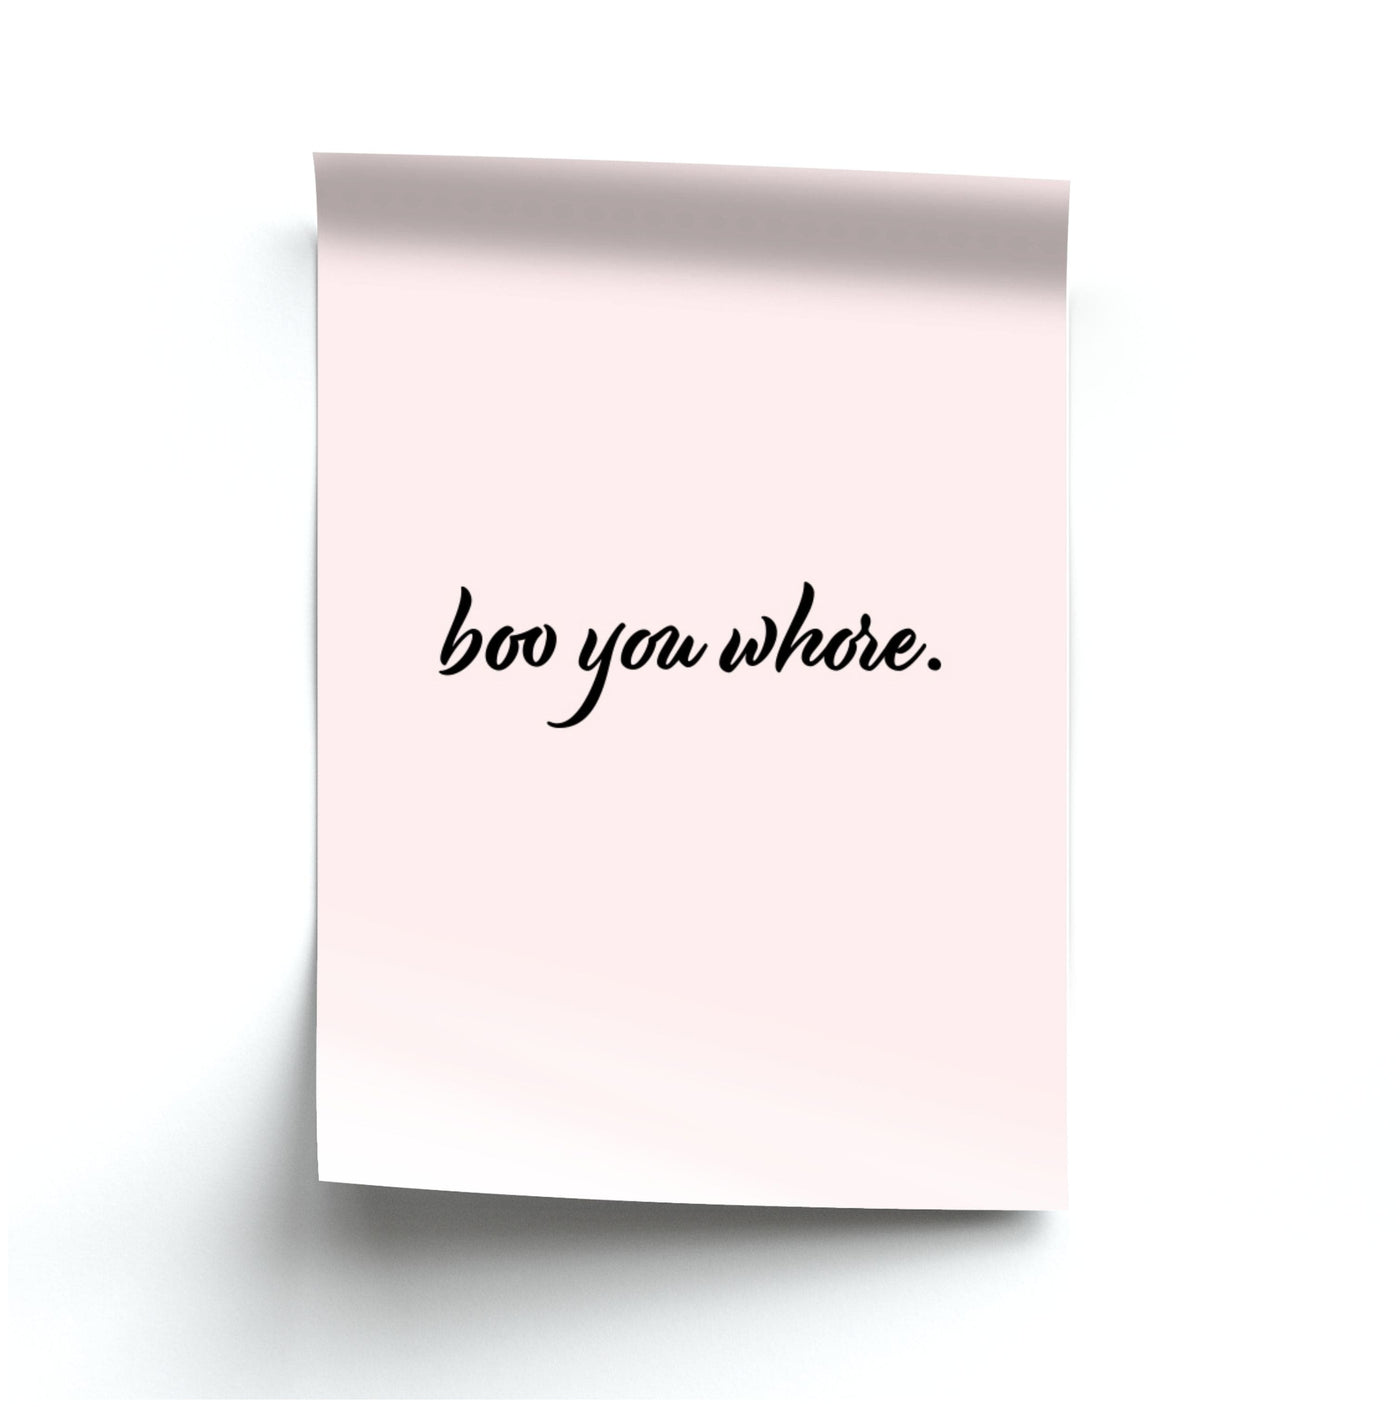 Boo You Whore - Mean Girls Poster